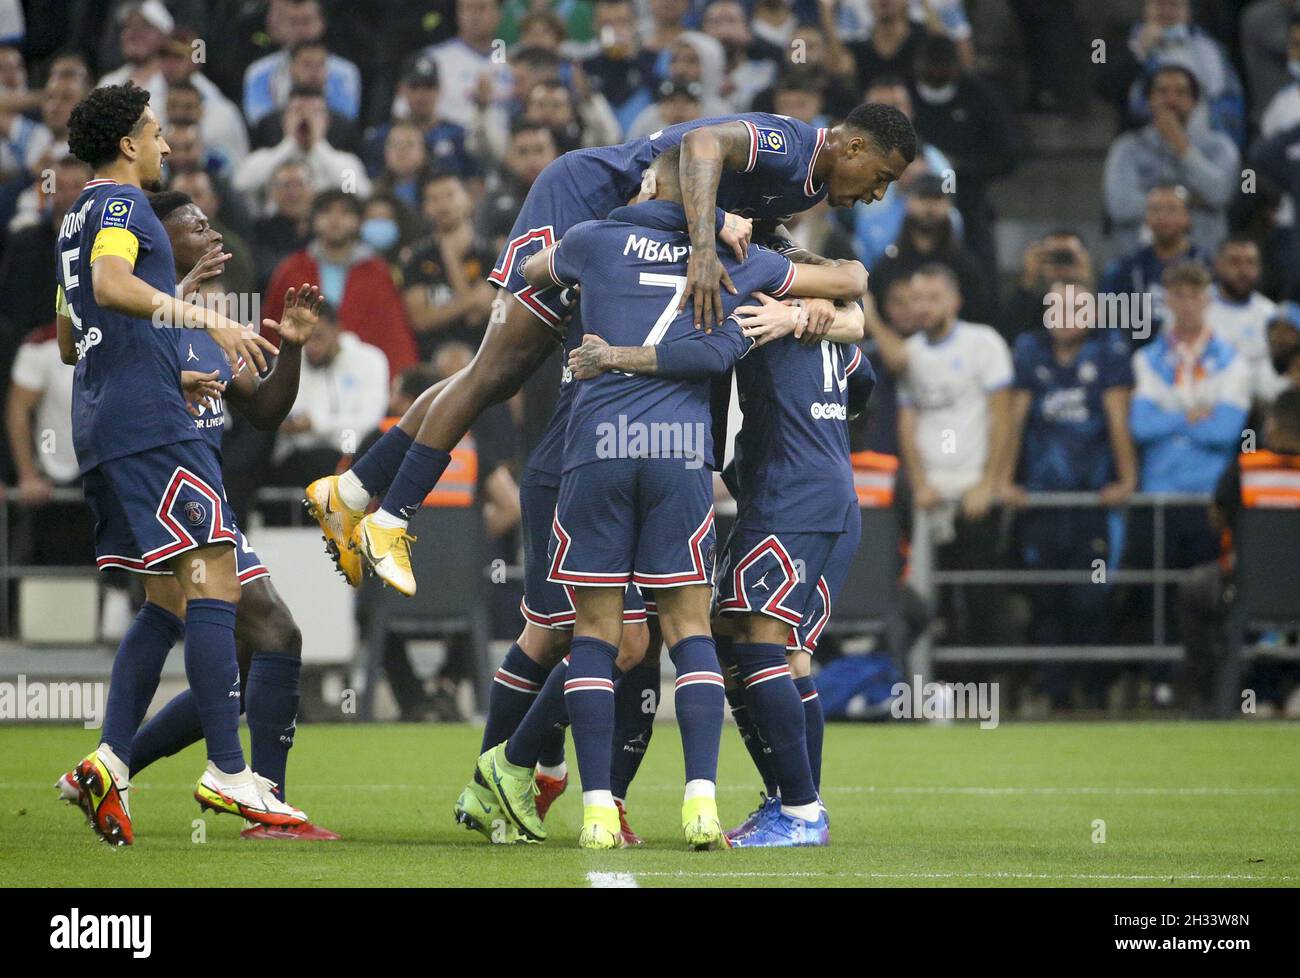 Presnel Kimpembe of PSG and teammates celebrate the goal of Neymar Jr of PSG,  a goal eventually cancelled by the video assistance (VAR) during the French  championship Ligue 1 football match between